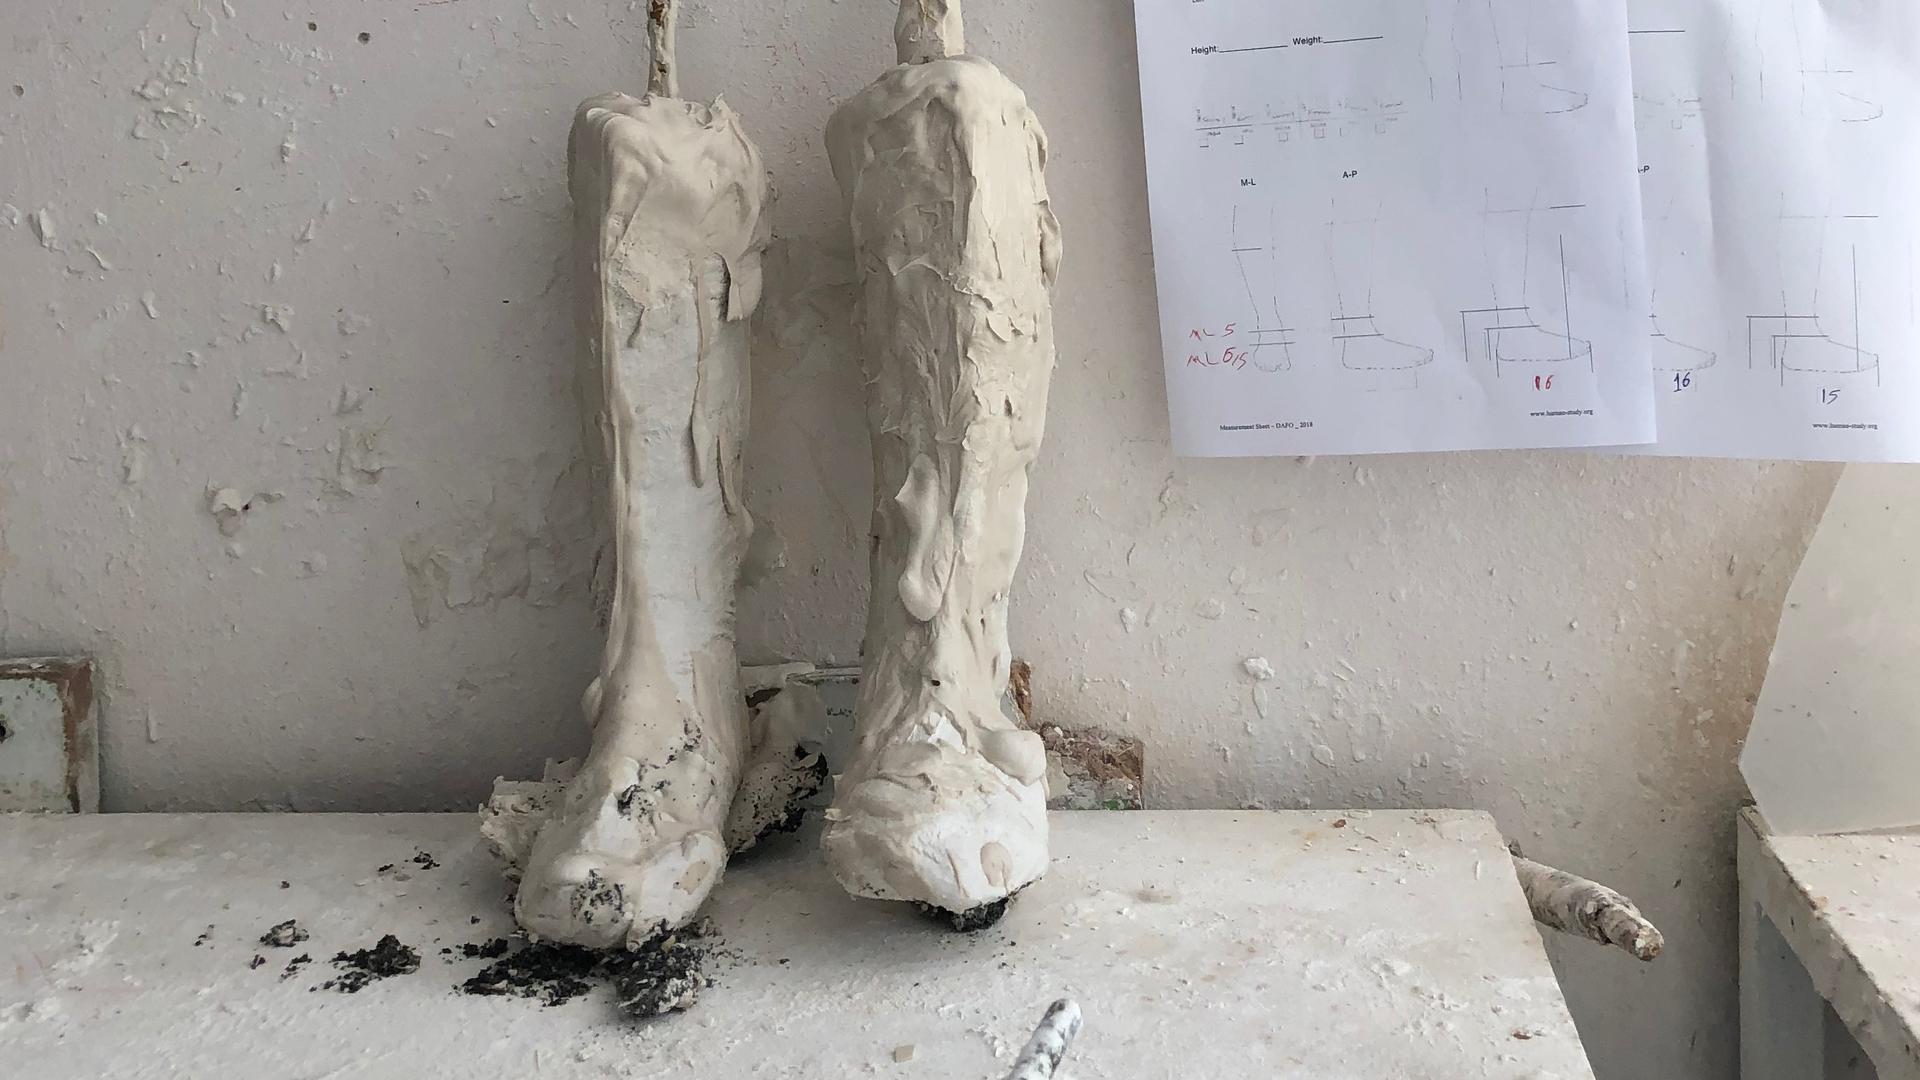 Temporary cast of Jad's legs at the workshop at the NSPPL center in Reyhanli, Turkey. Specialists will use these to make the permanent braces that will help Jad walk.